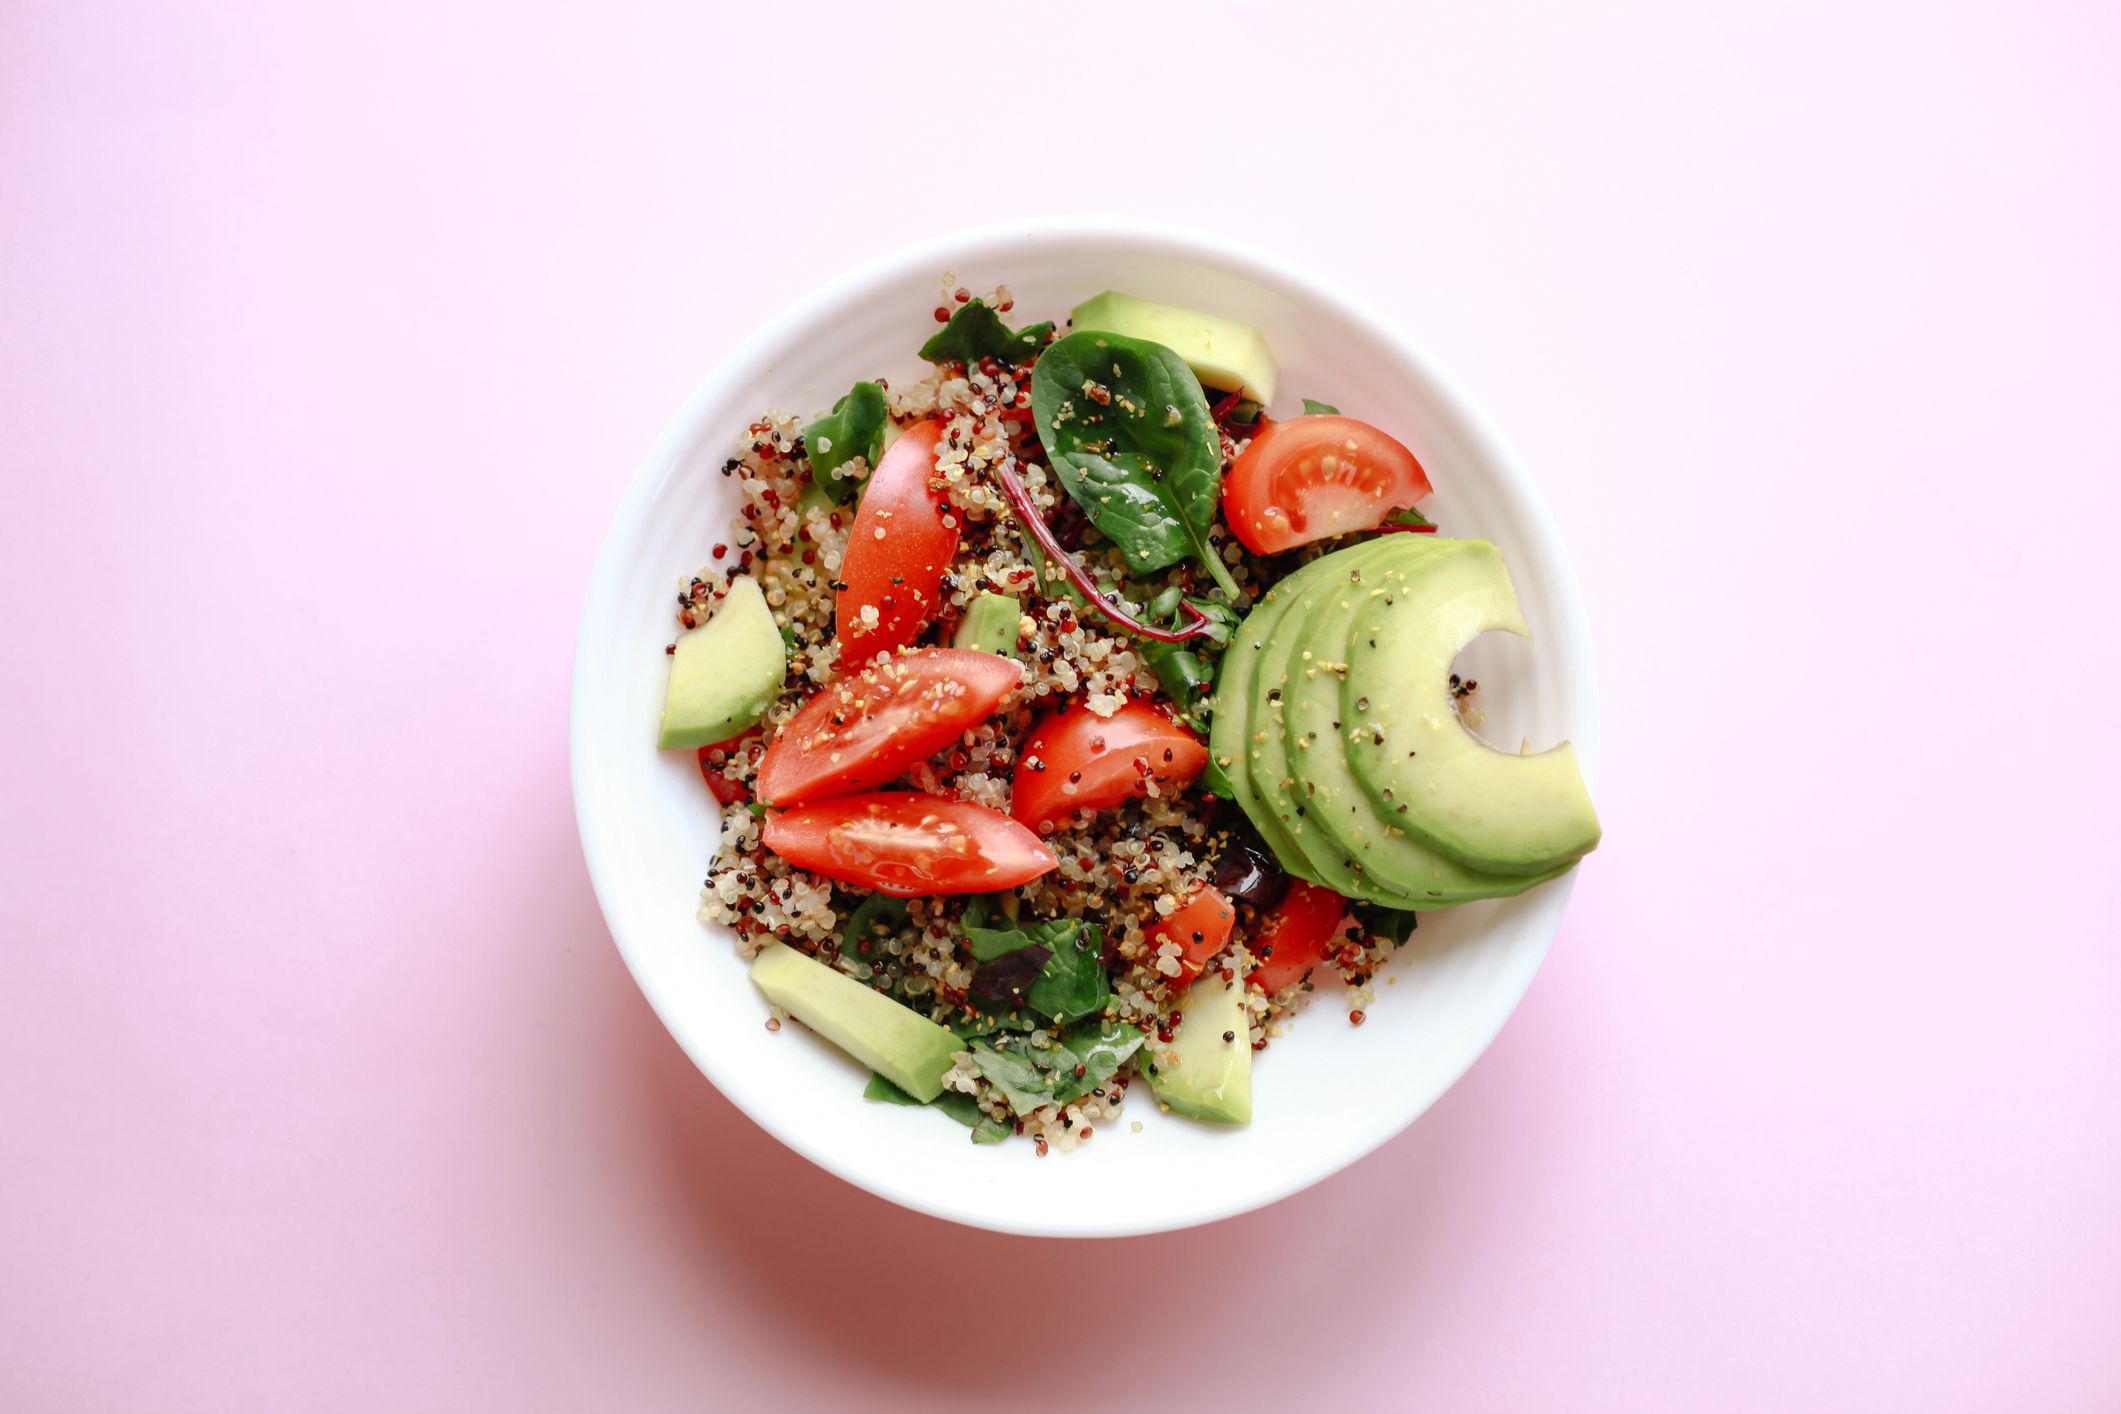 https://hips.hearstapps.com/hmg-prod/images/healthy-vegan-meal-made-of-grain-crop-quinoa-seed-royalty-free-image-1700157315.jpg